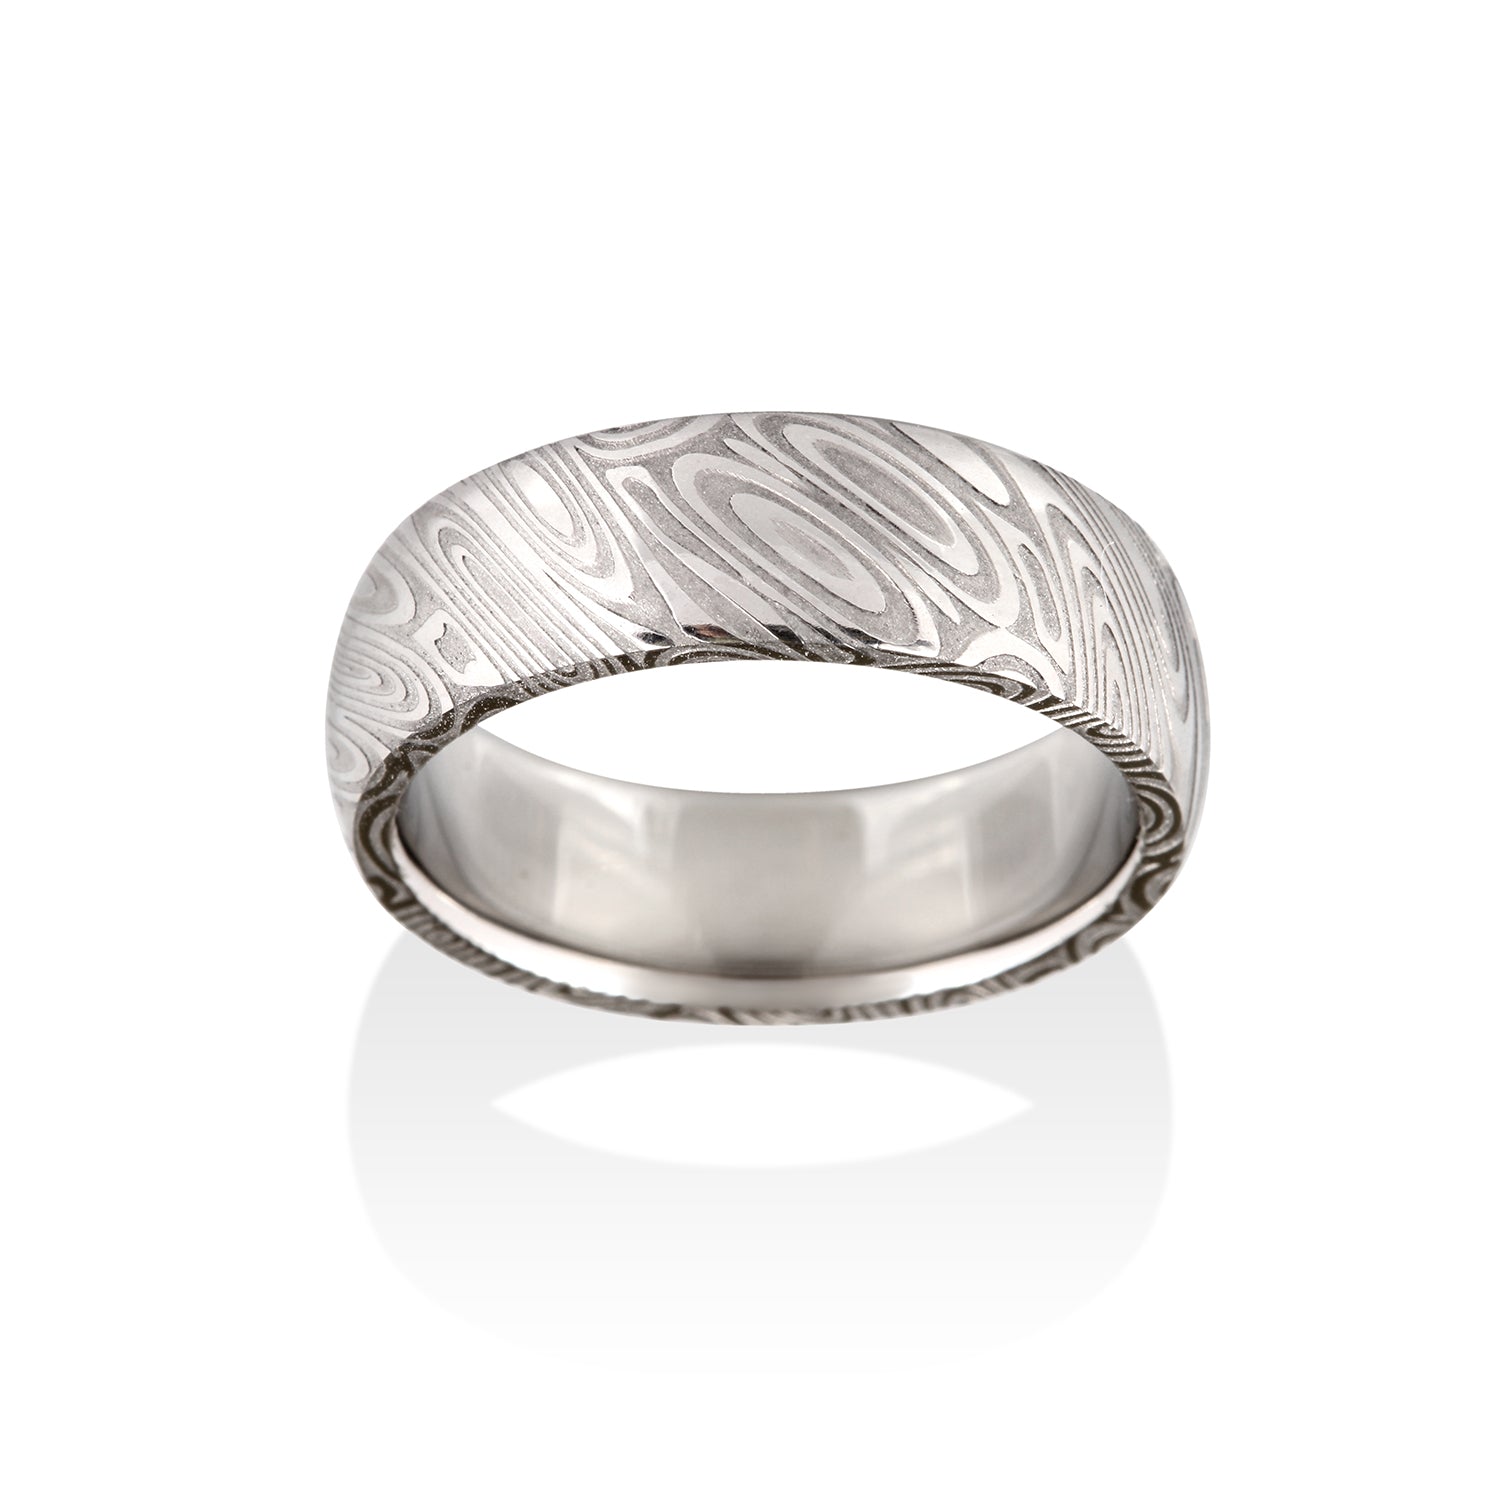 Wood Grain Damascus Steel Ring by Chris Ploof - Talisman Collection Fine Jewelers